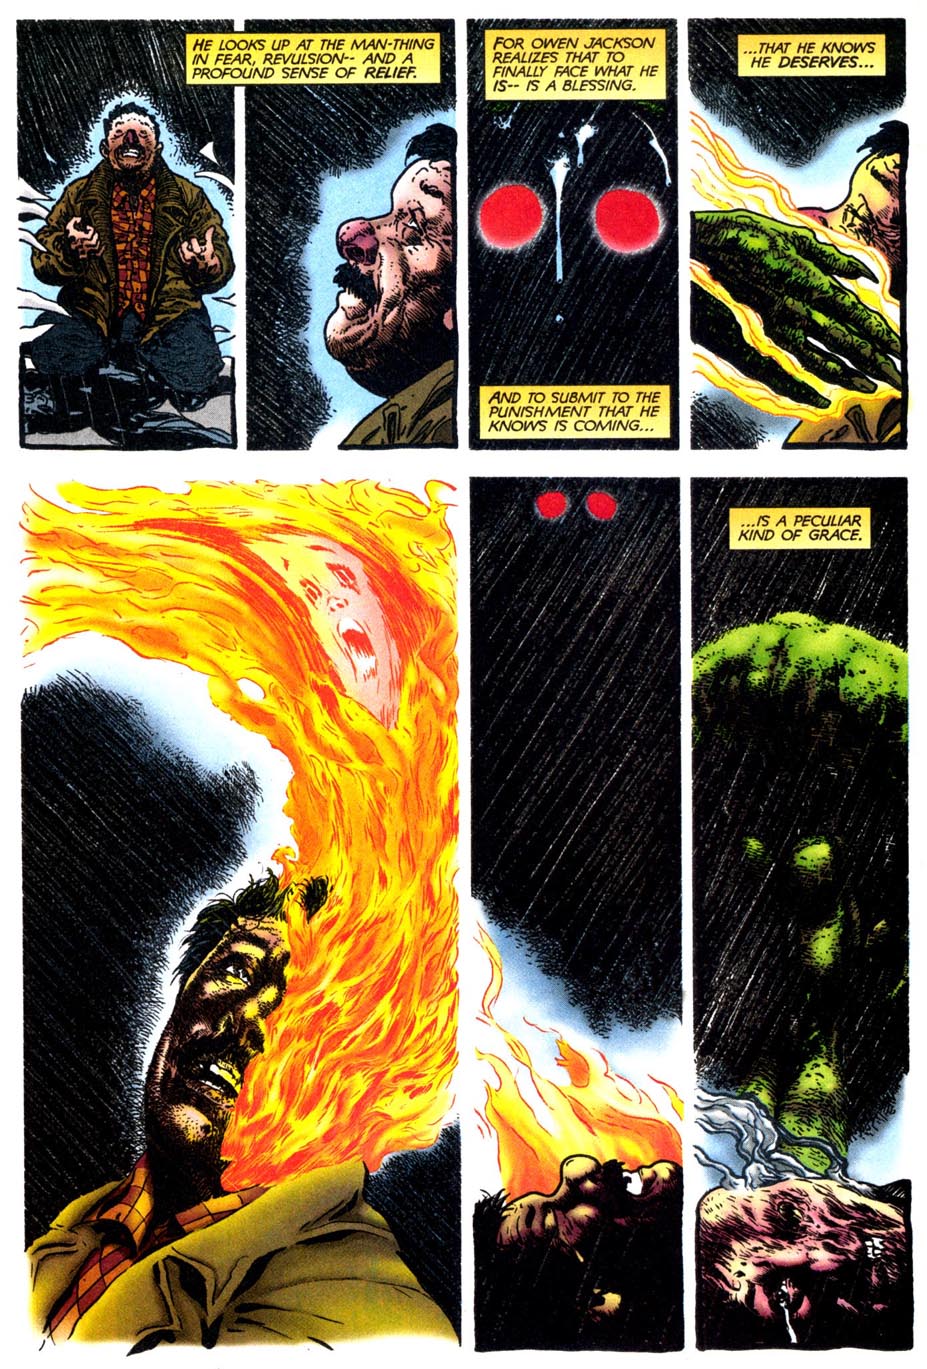 Read online Man-Thing (1997) comic -  Issue #1 - 14